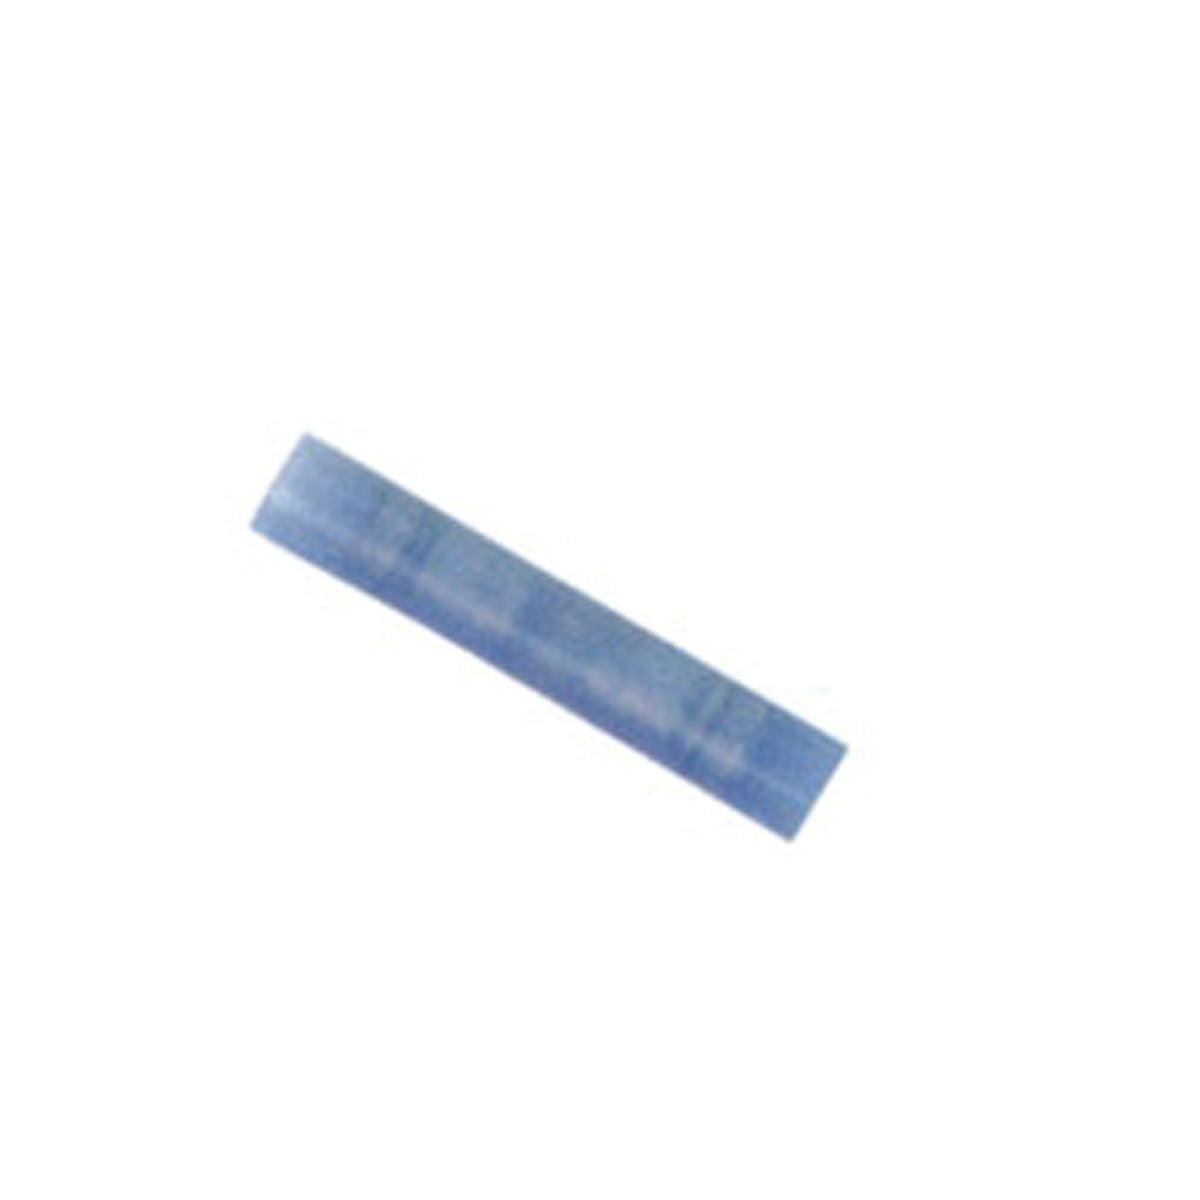 Ancor 230110 Marine Grade Butt Connector - 16-14, Blue, Pack of 7